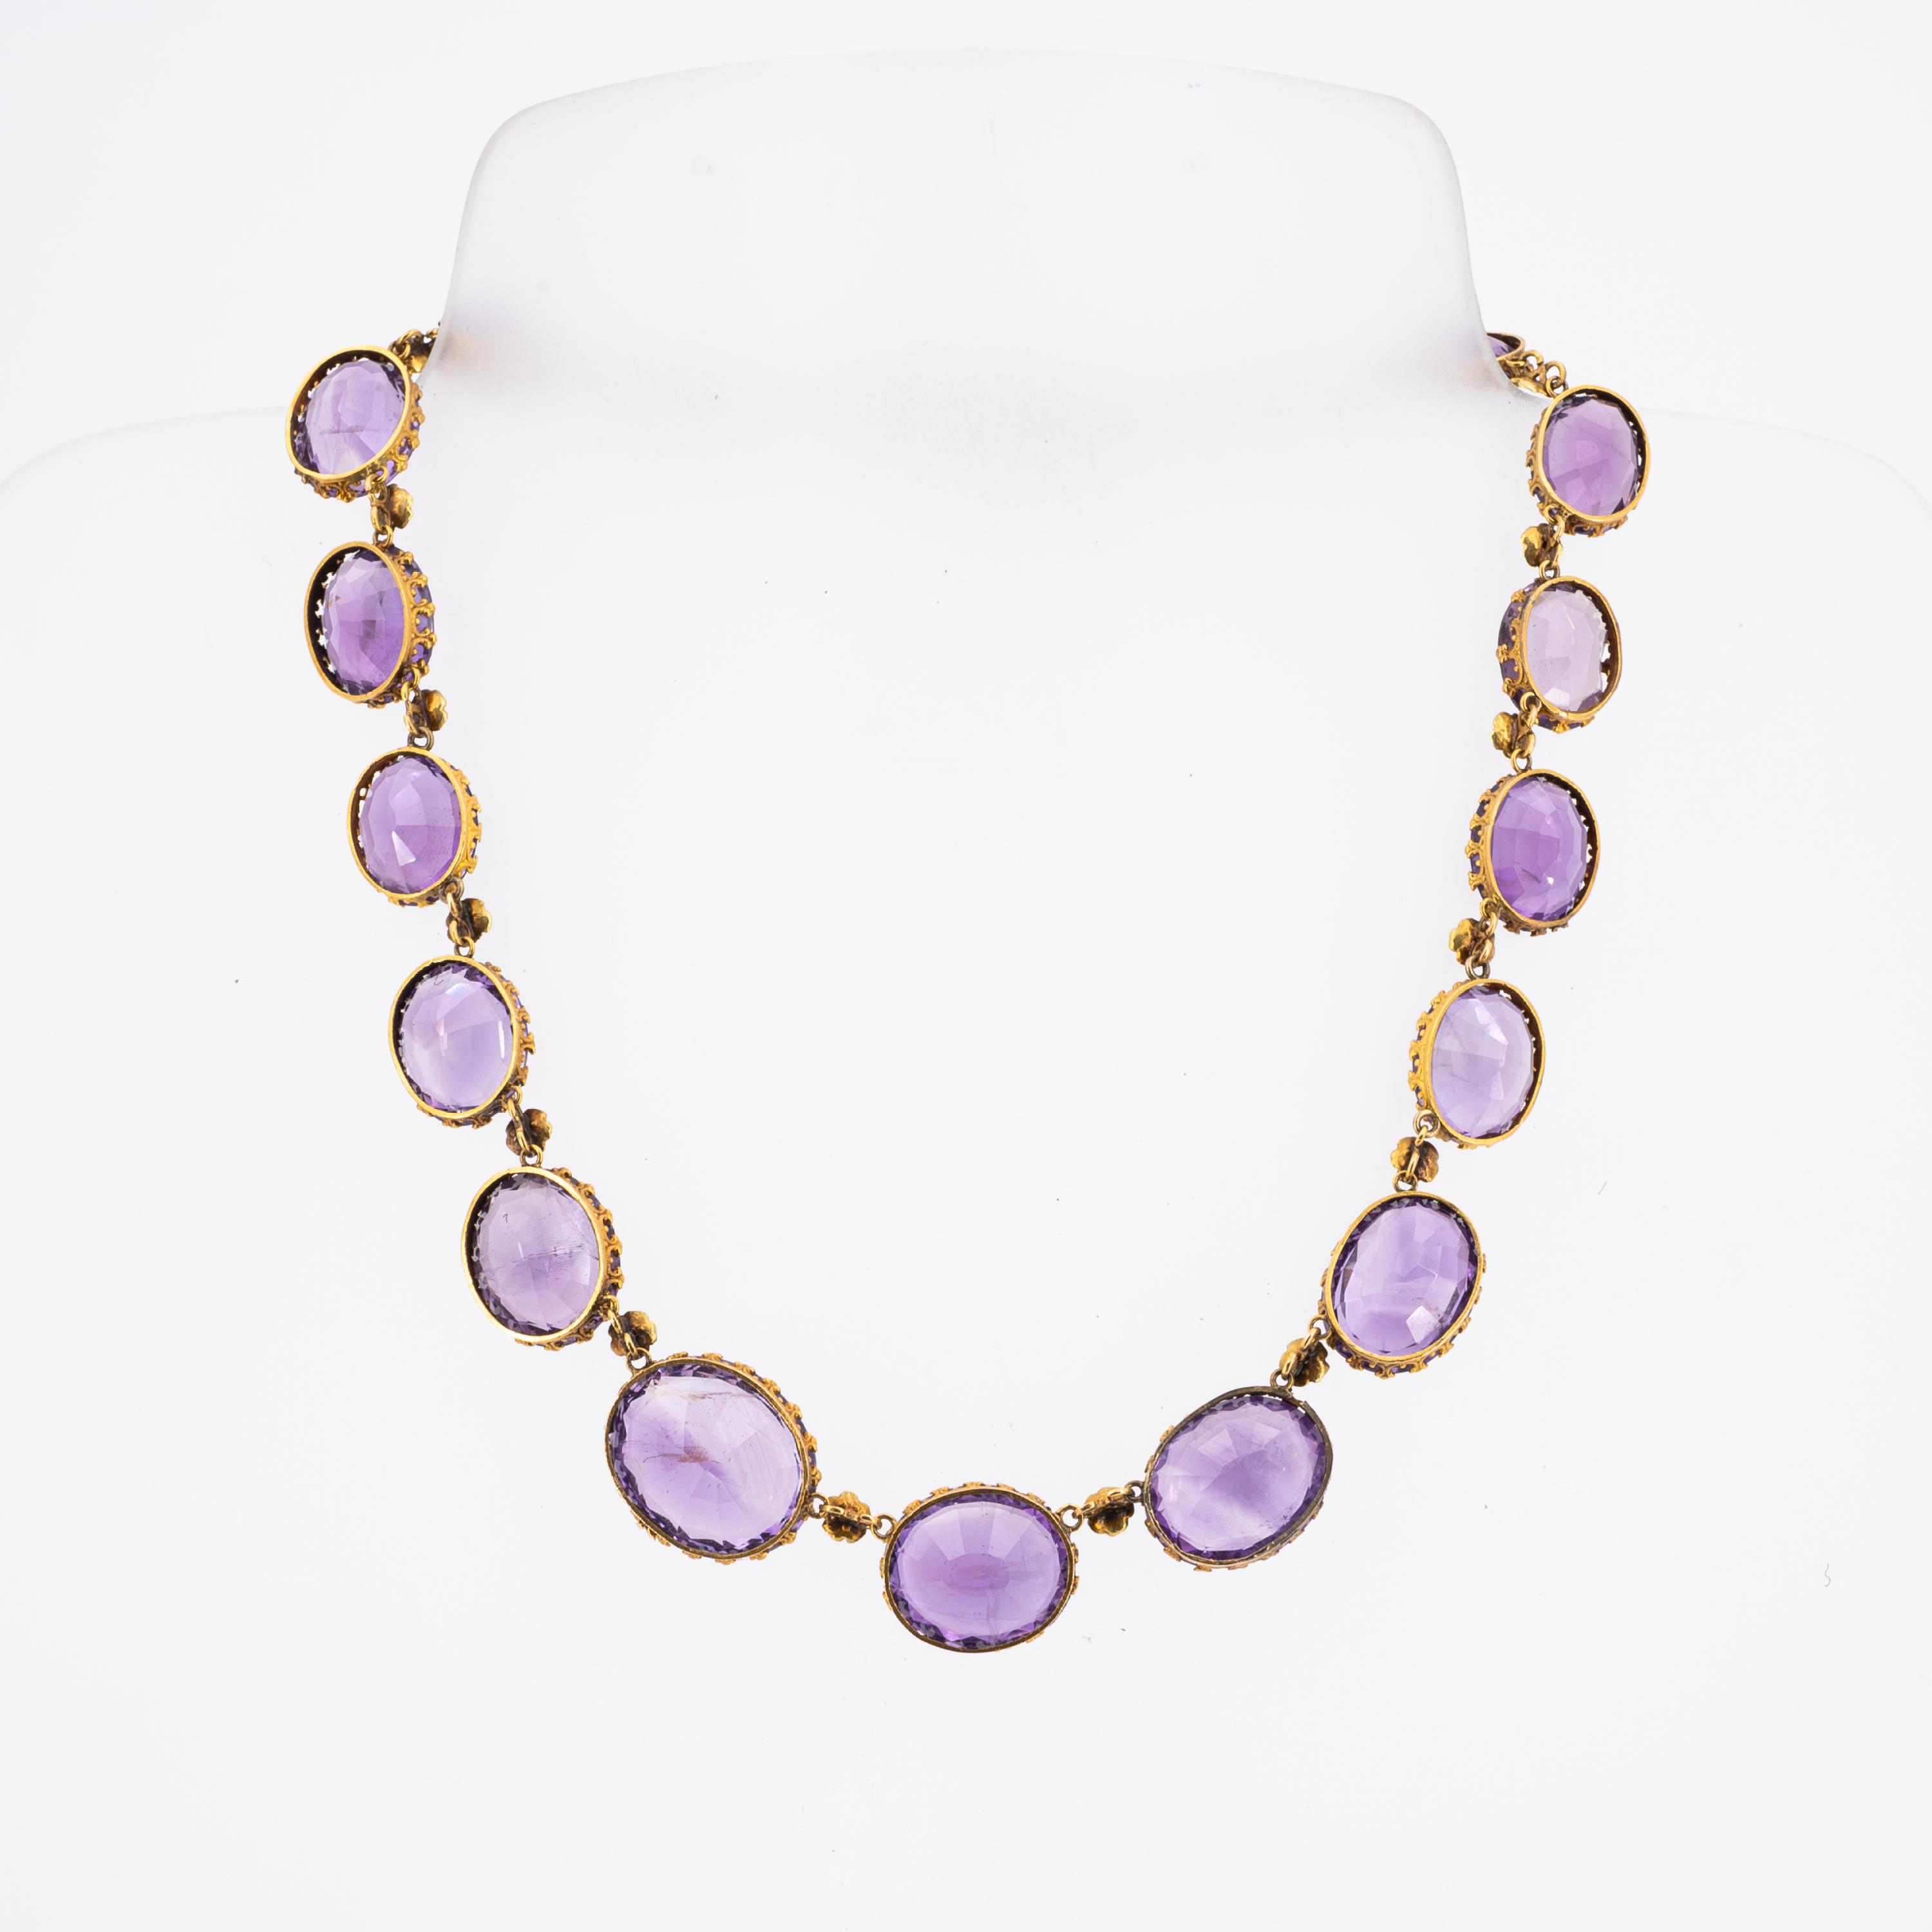 Historic Amethyst-Necklace - Image 2 of 4